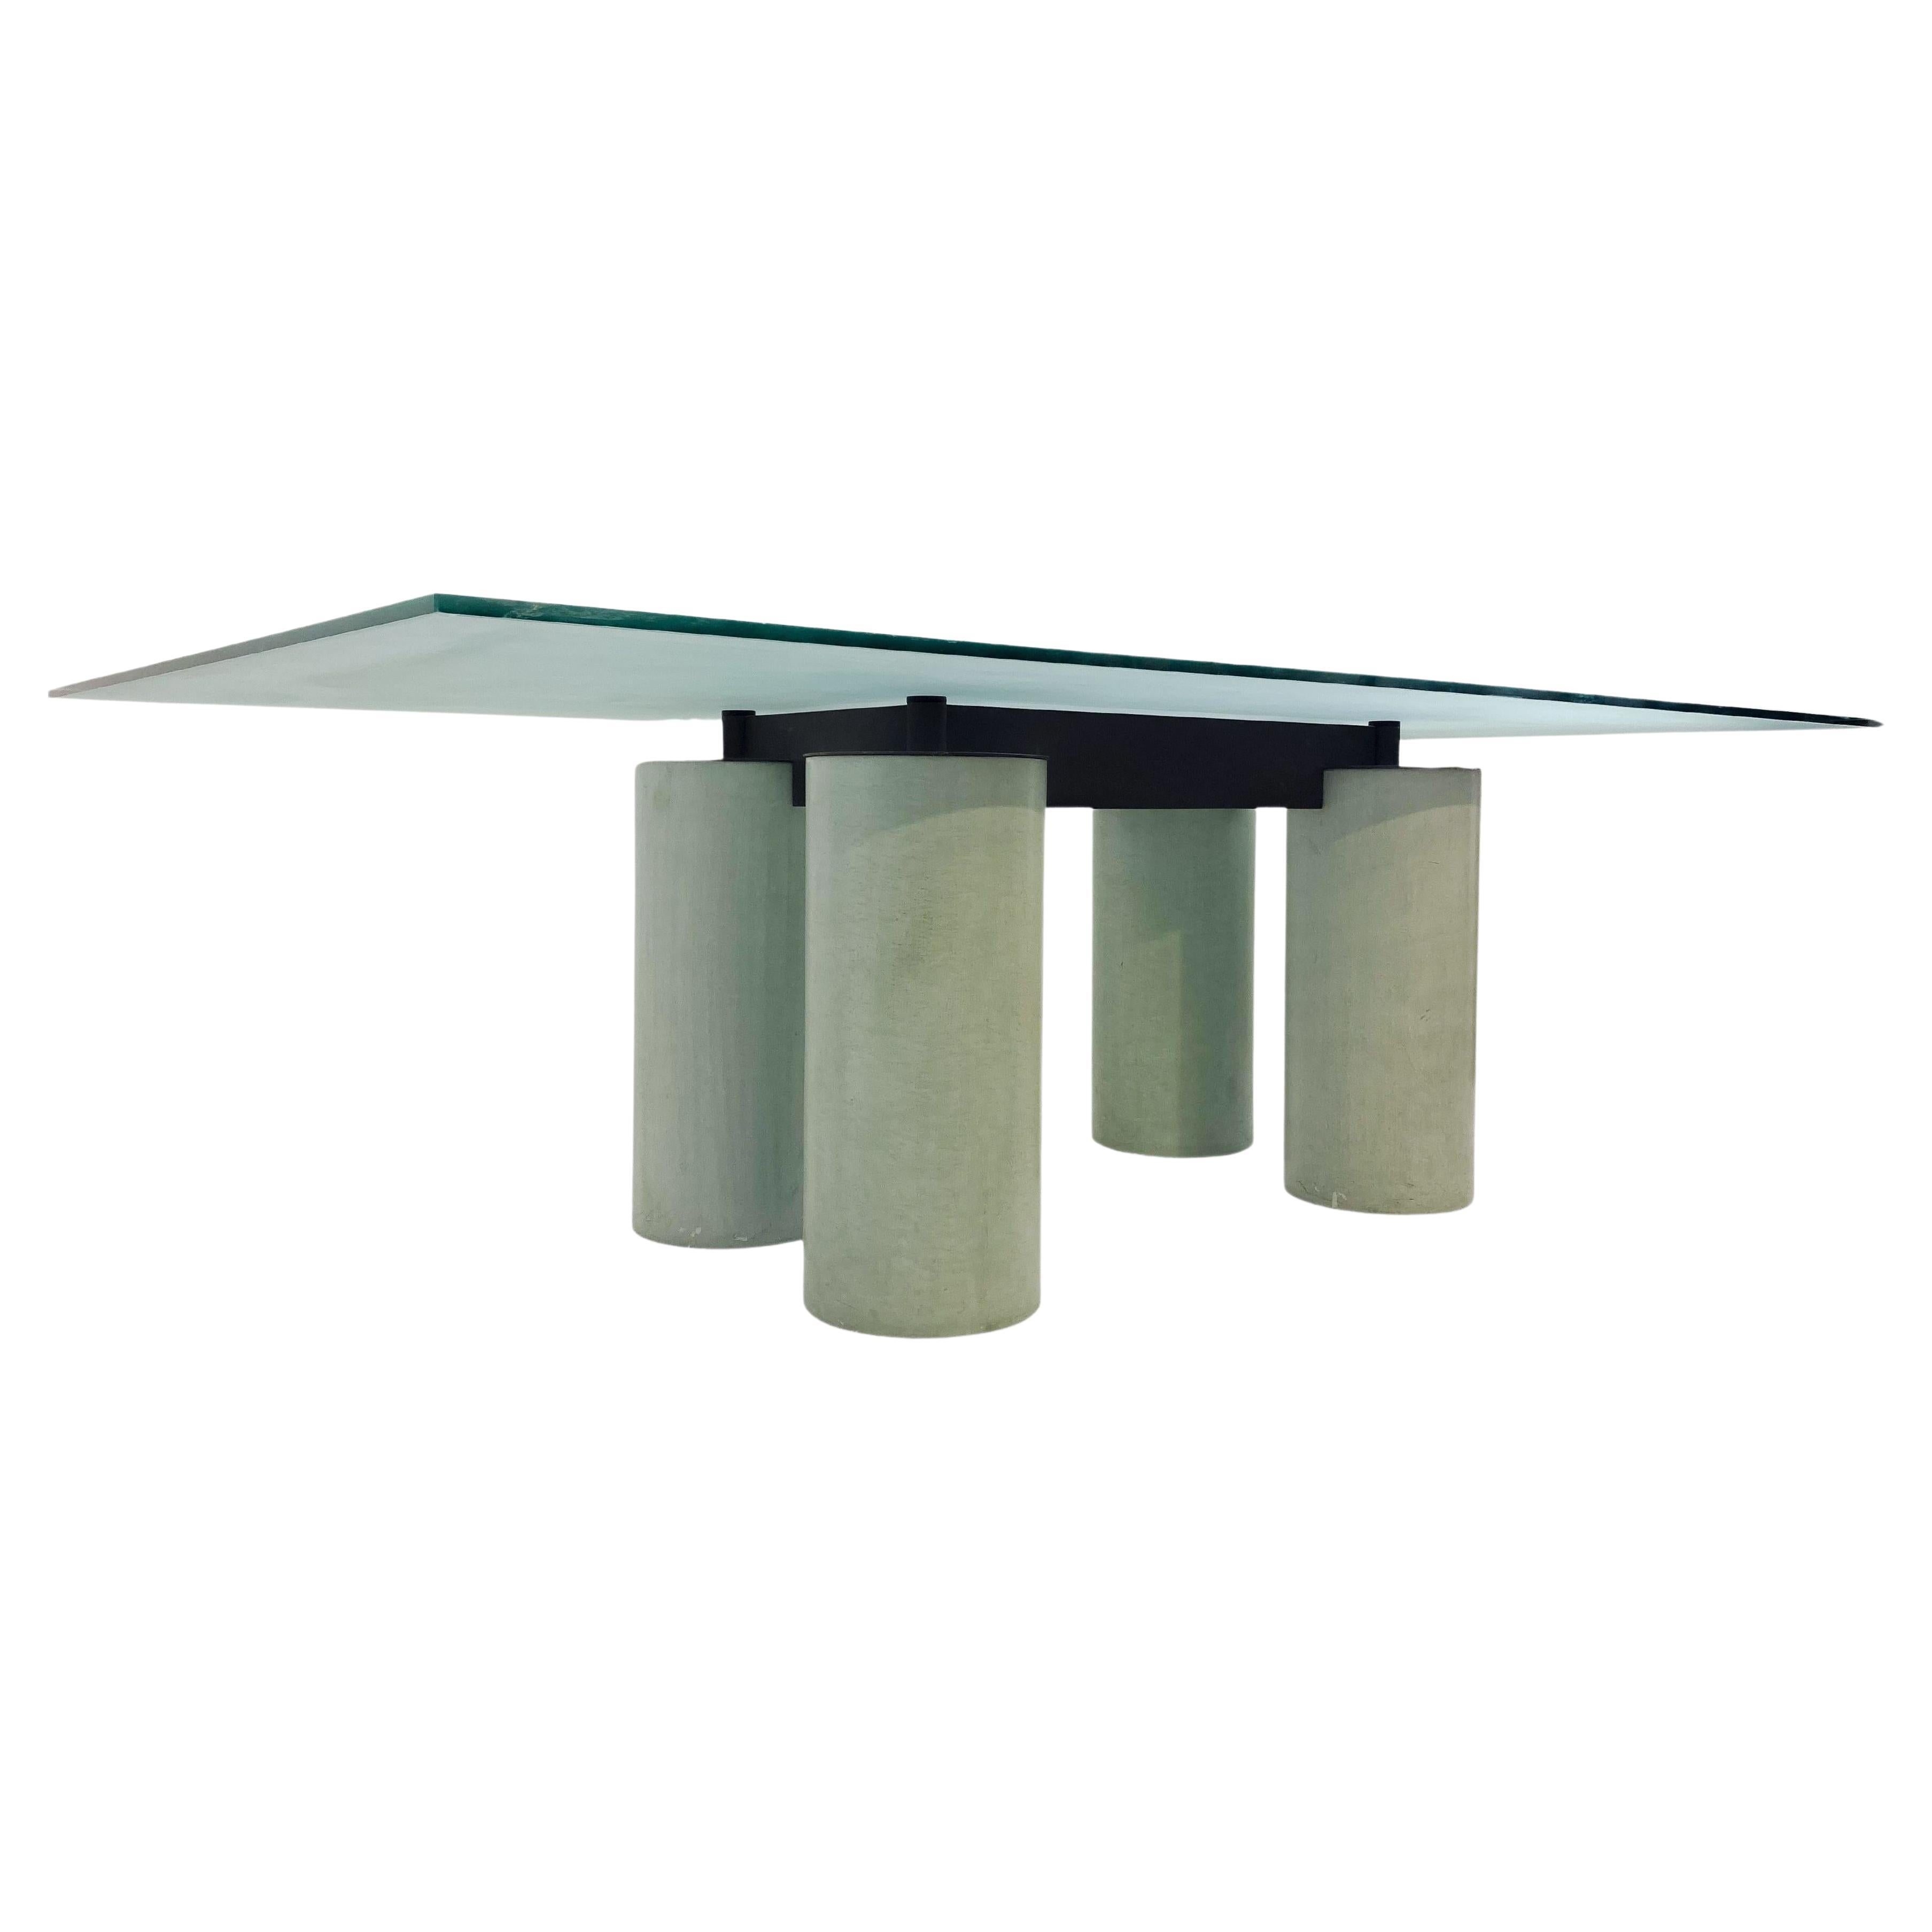 Mid-Century Modern 'Serenissima' Dining Table by Lella & Massimo Vignelli For Sale